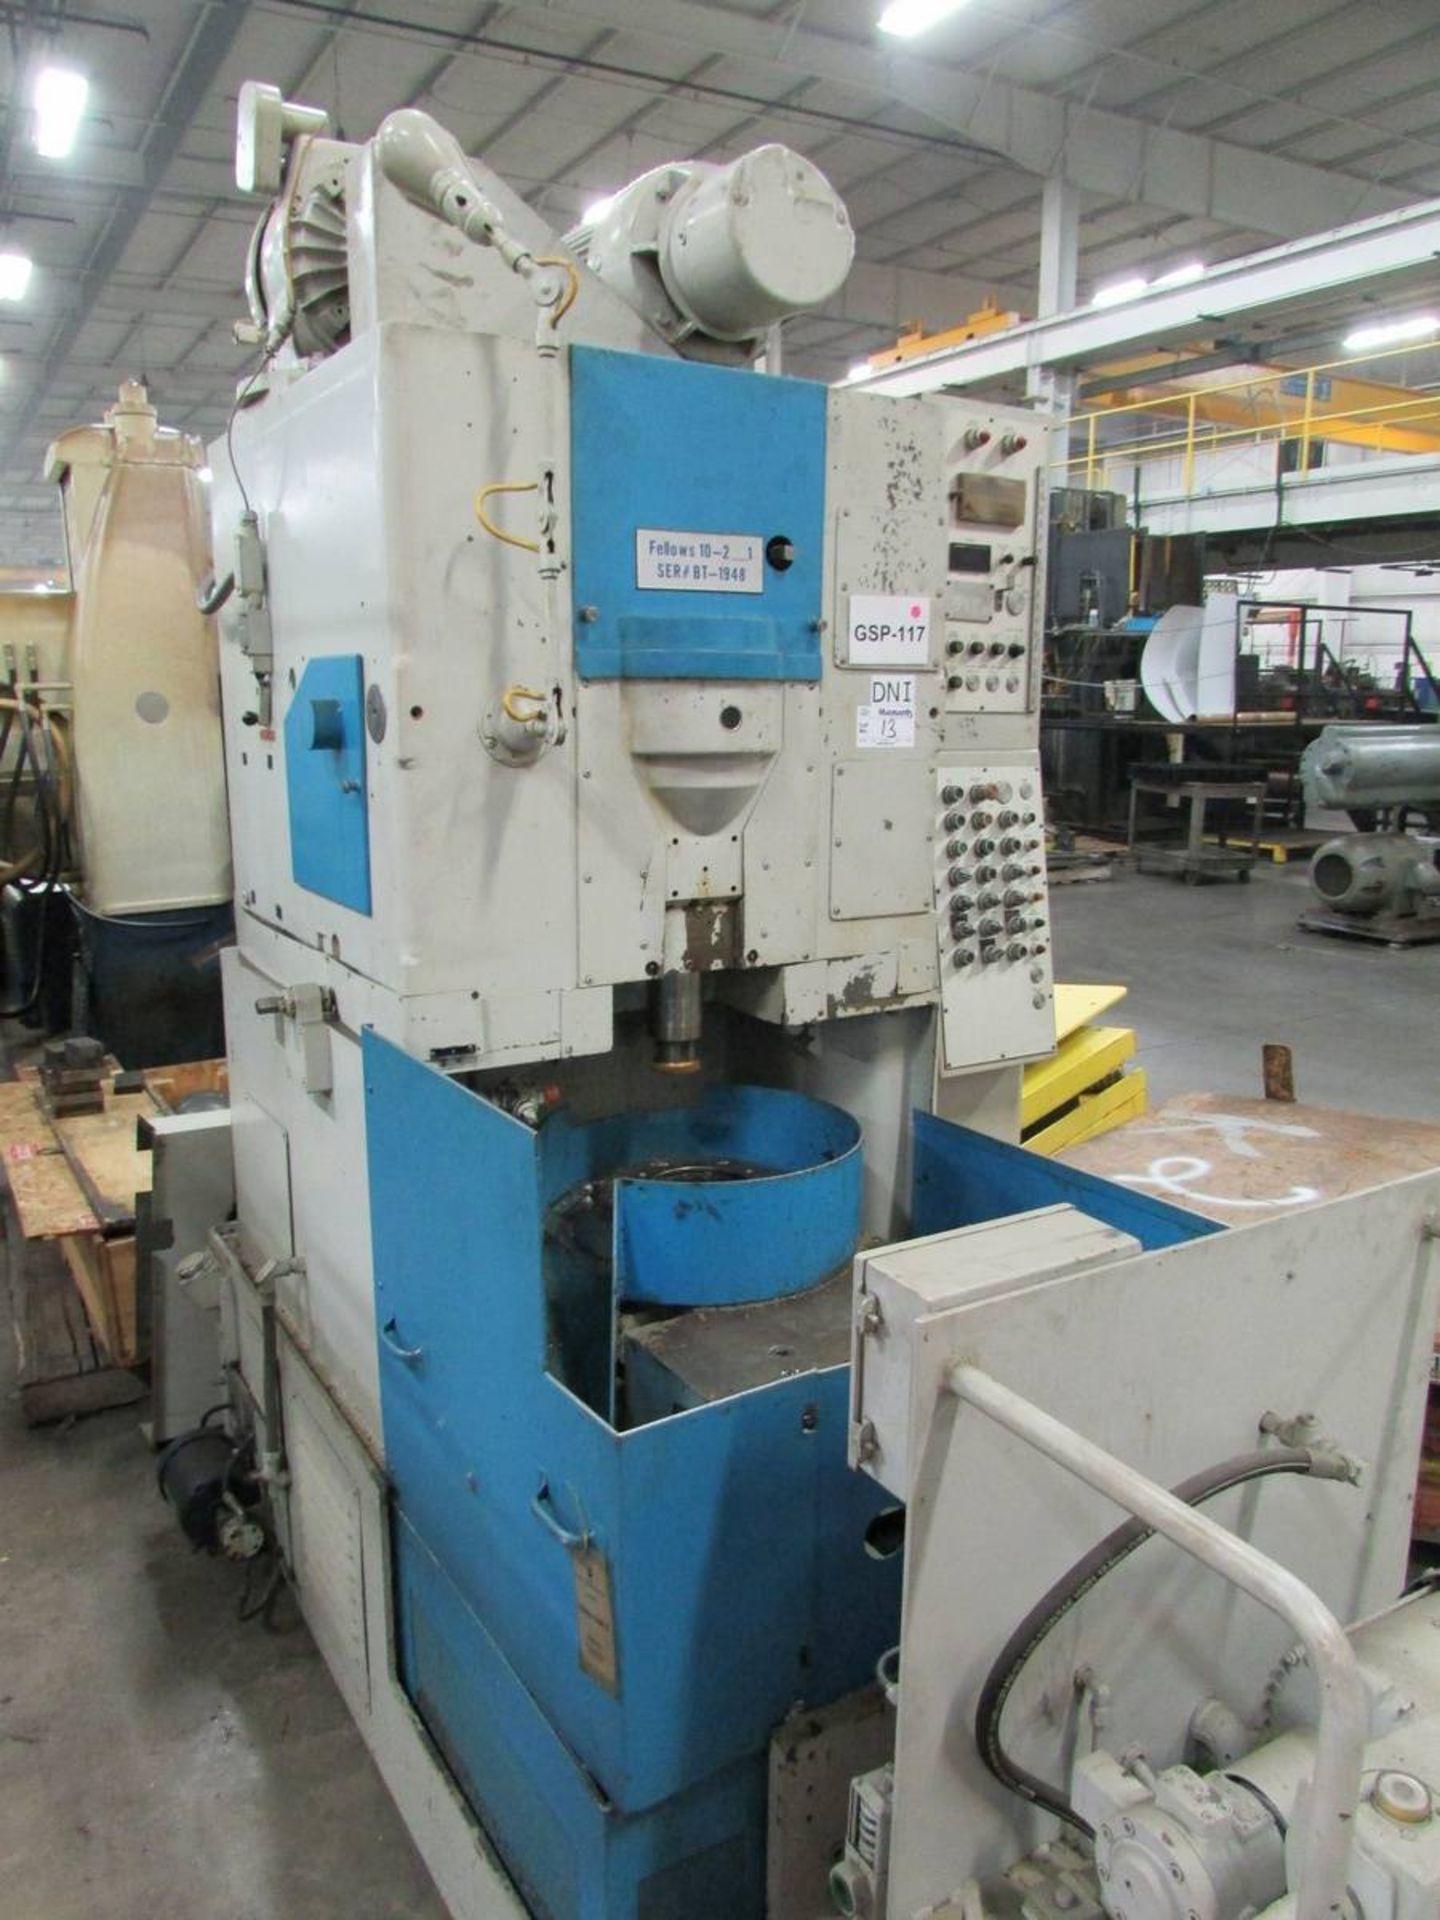 Fellows 10-2_2 Vertical Gear Shaping Machine - Image 3 of 18